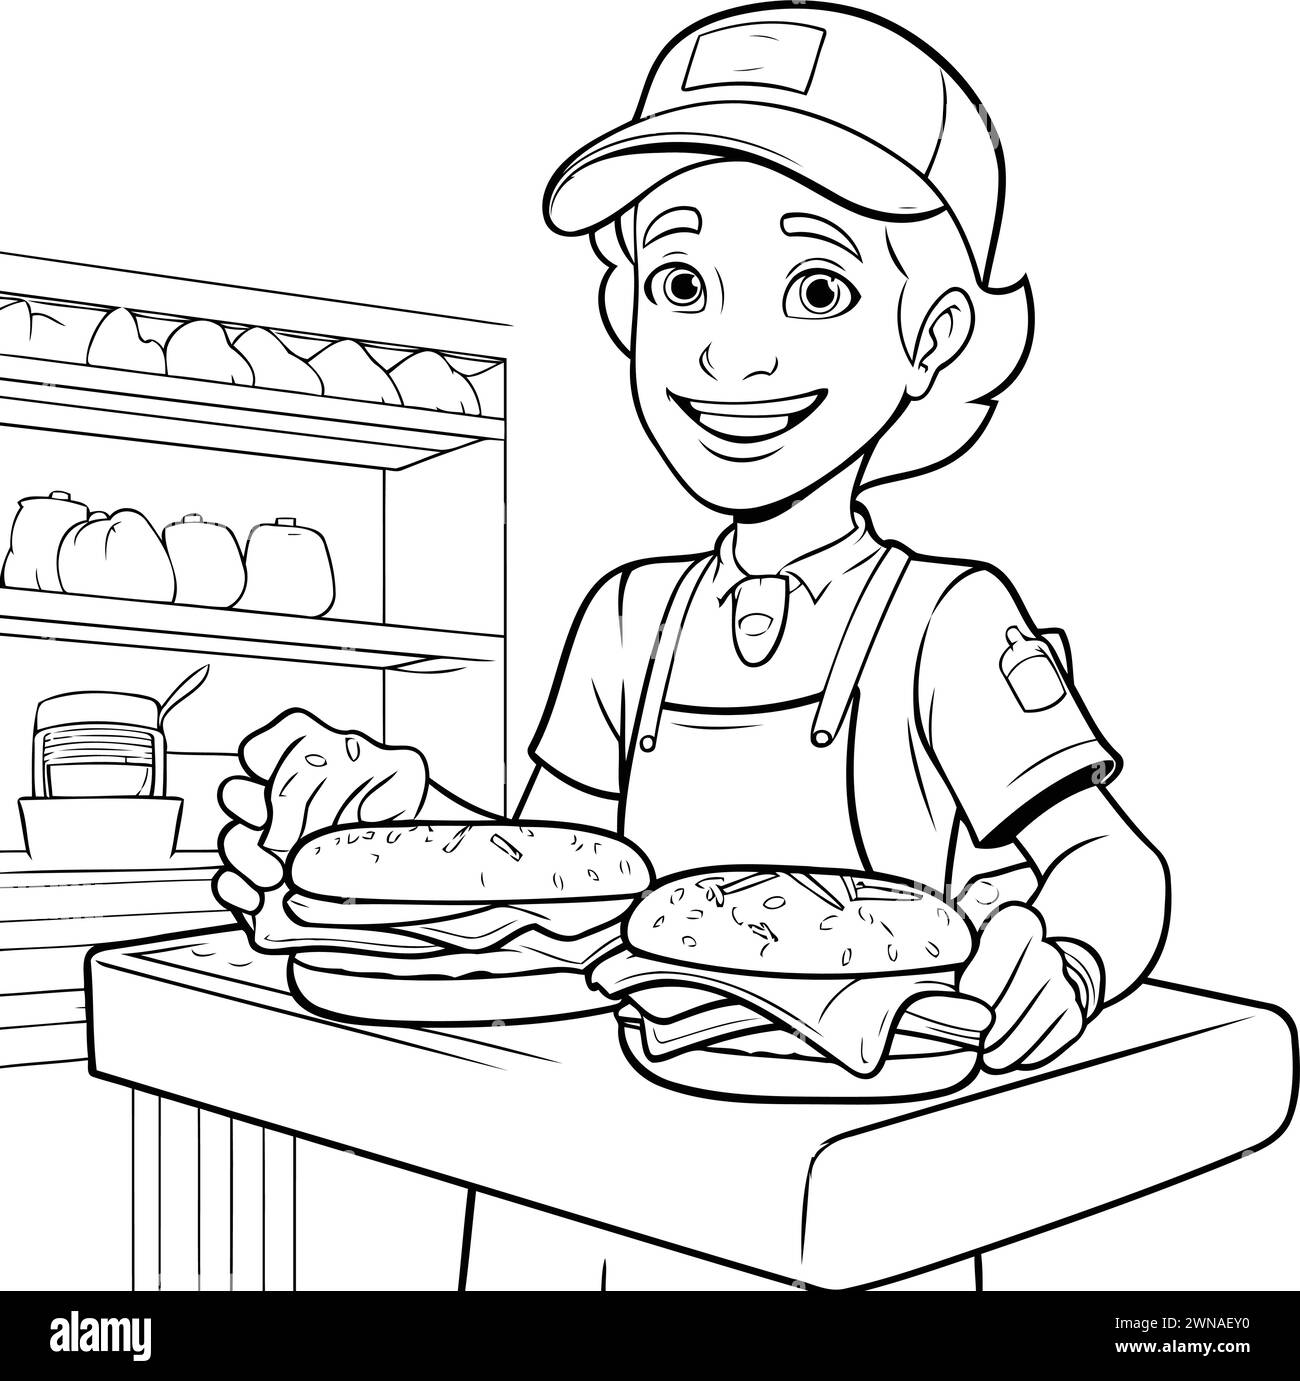 Cartoon Illustration of a Fast Food Seller or Chef Coloring Page Stock Vector